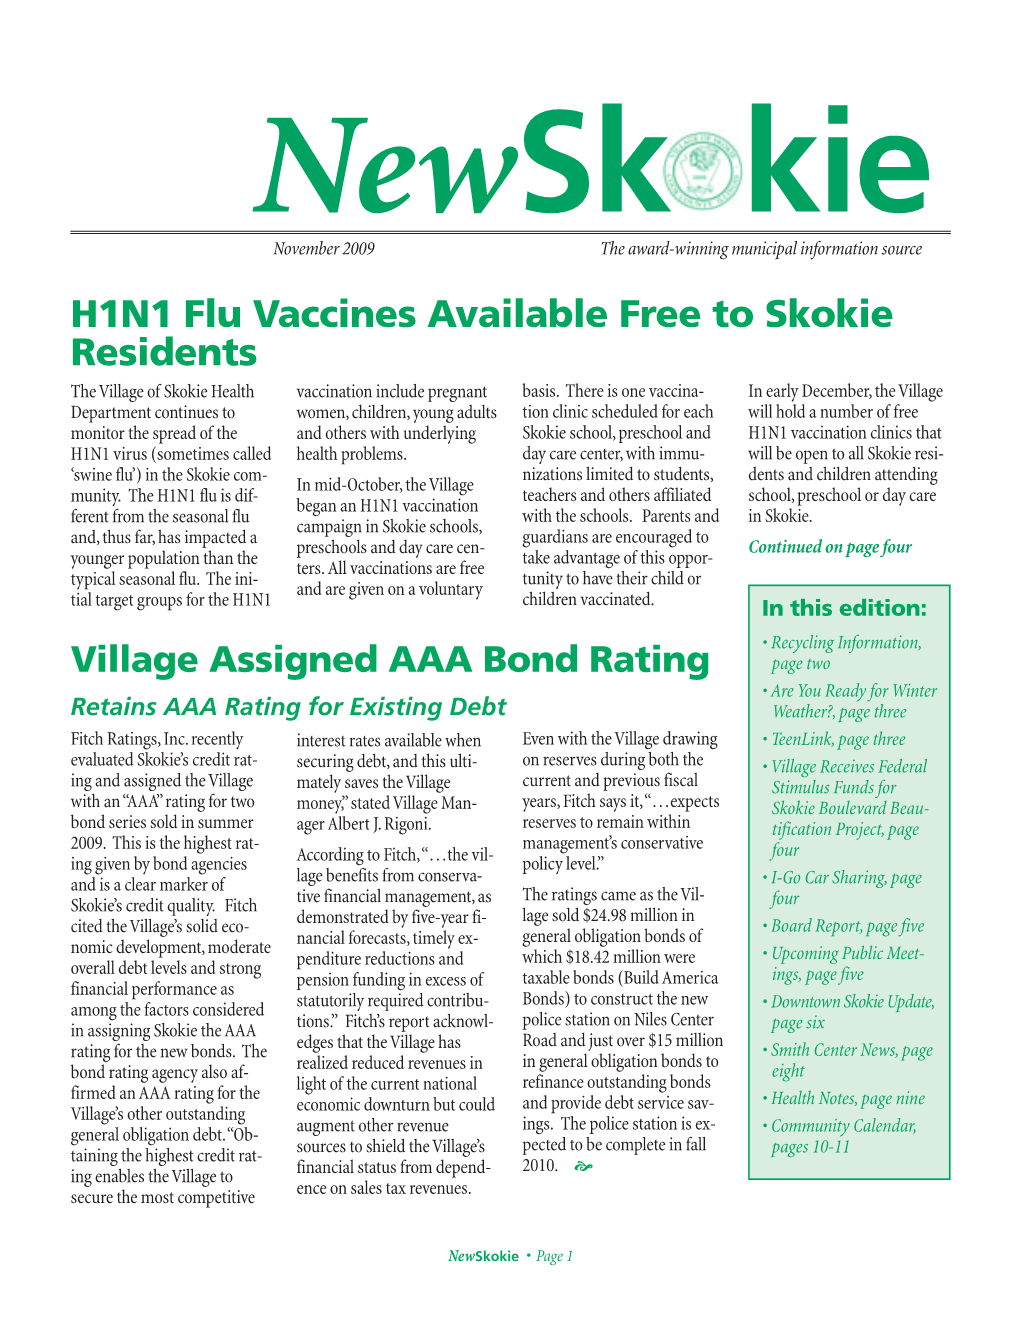 H1N1 Flu Vaccines Available Free to Skokie Residents the Village of Skokie Health Vaccination Include Pregnant Basis